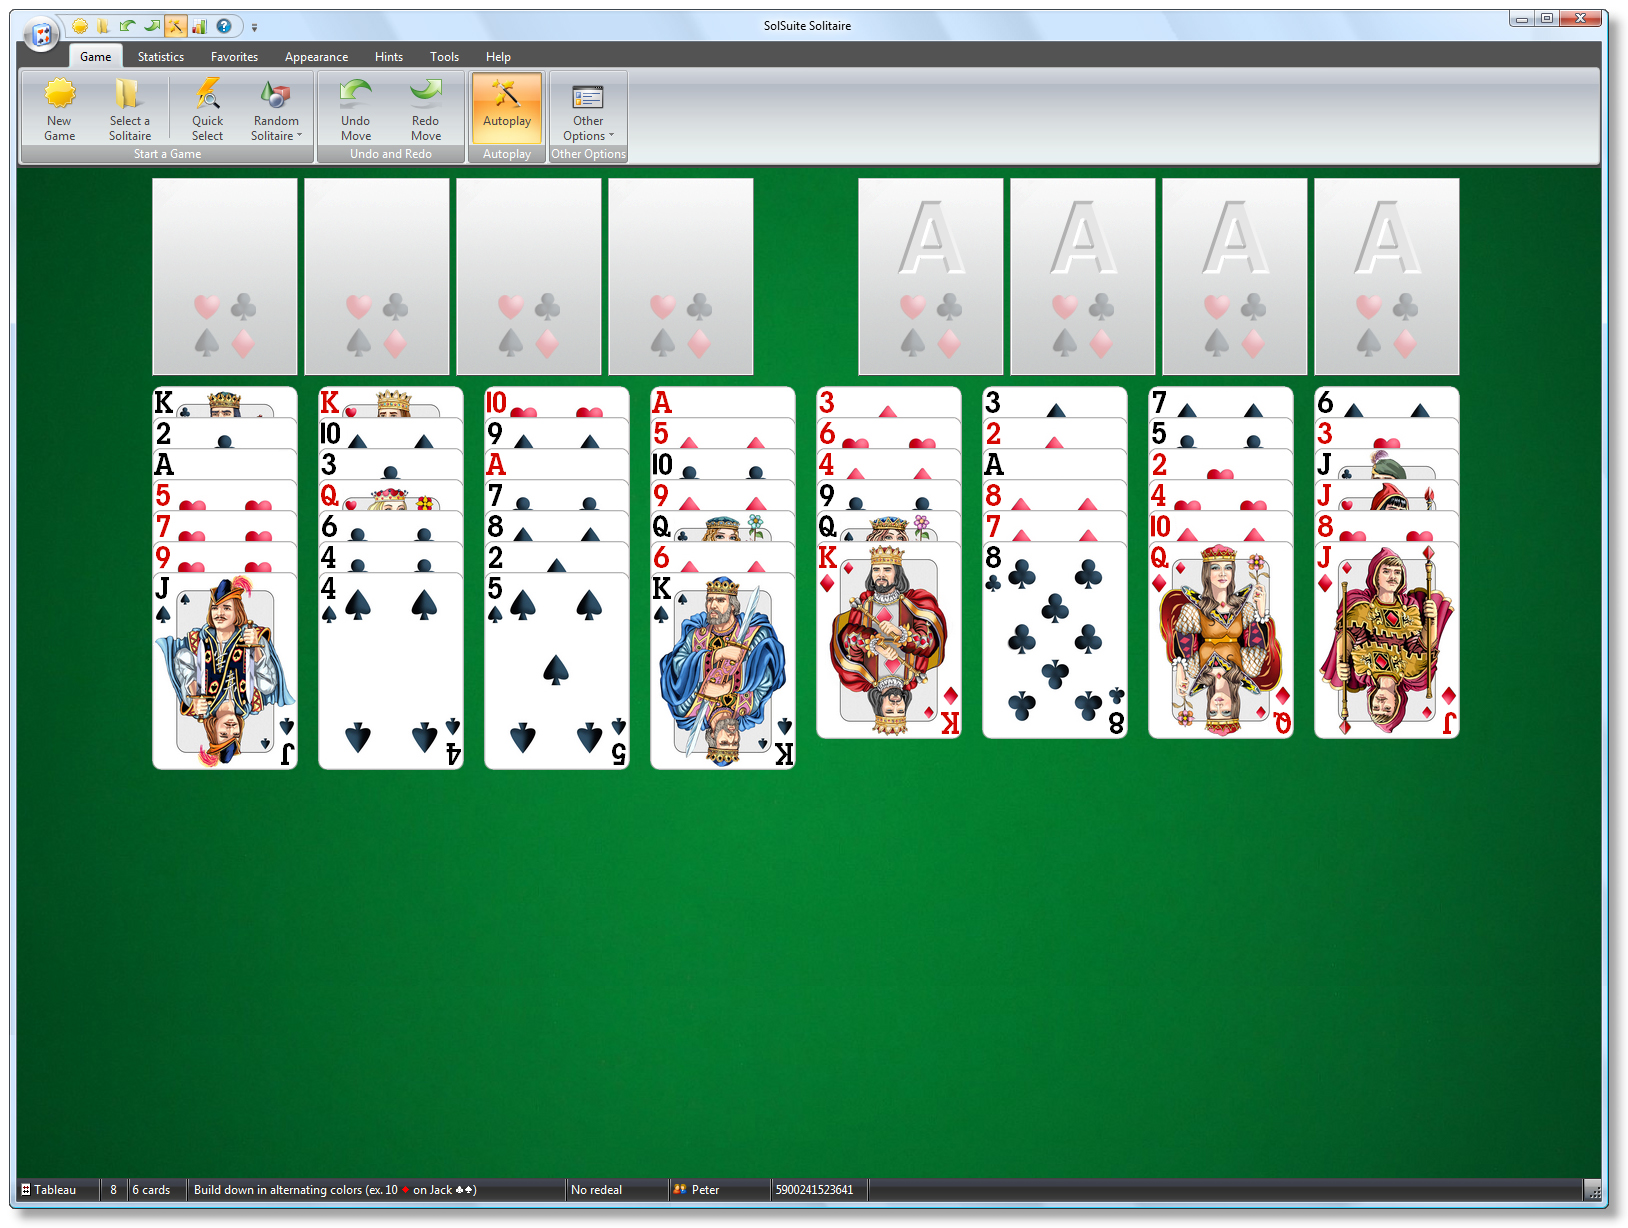 SolSuite Solitaire - FreeCell screenshot 1600x1200